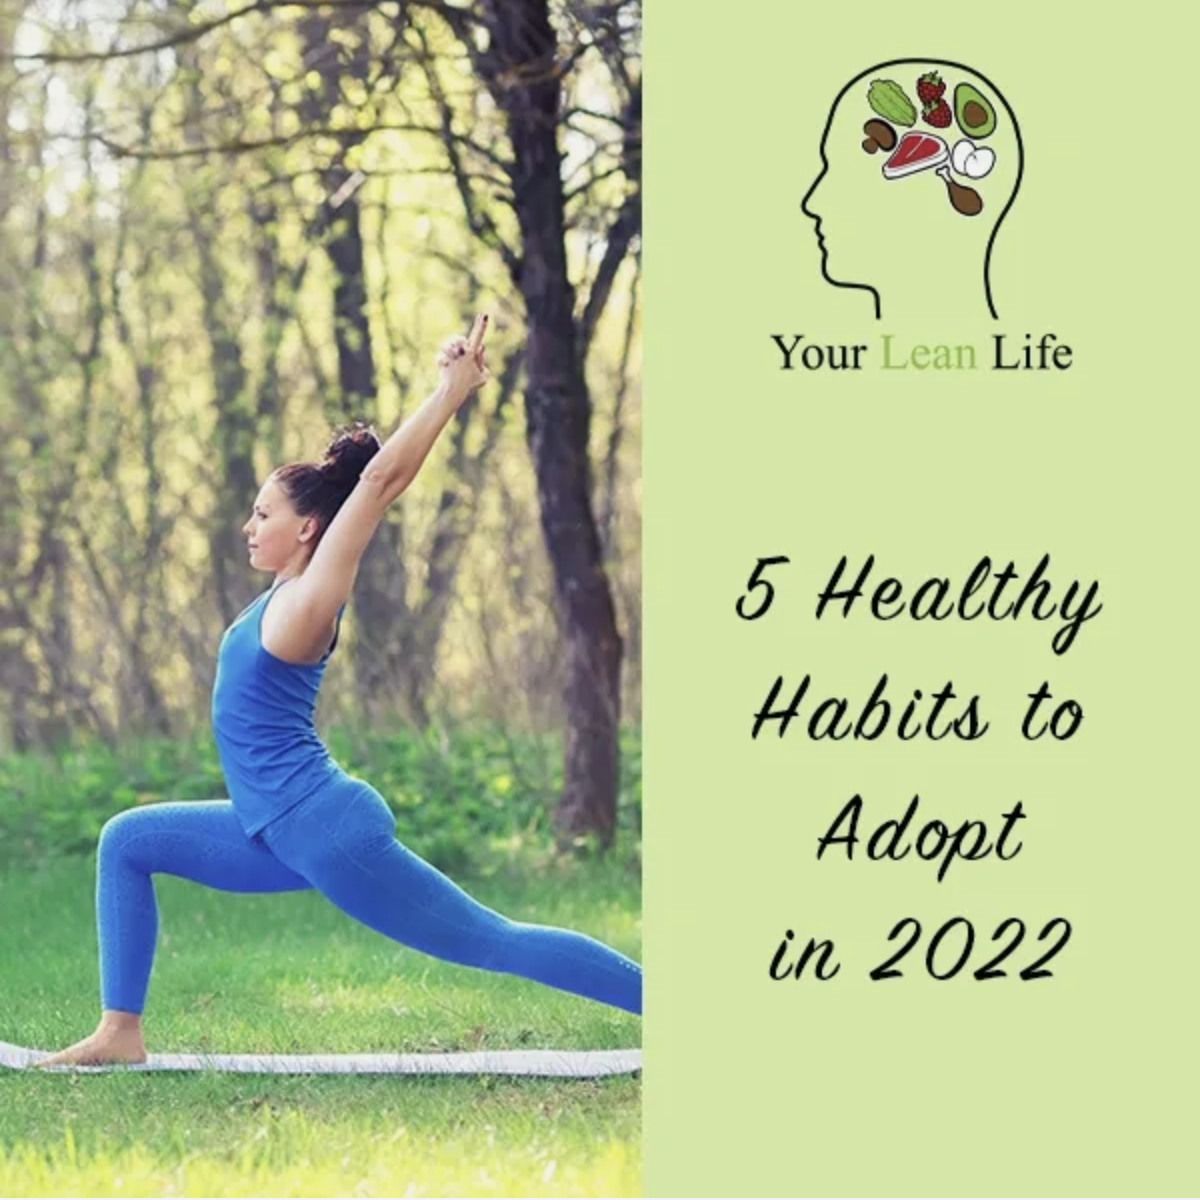 5 Healthy Habits to Adopt in 2022